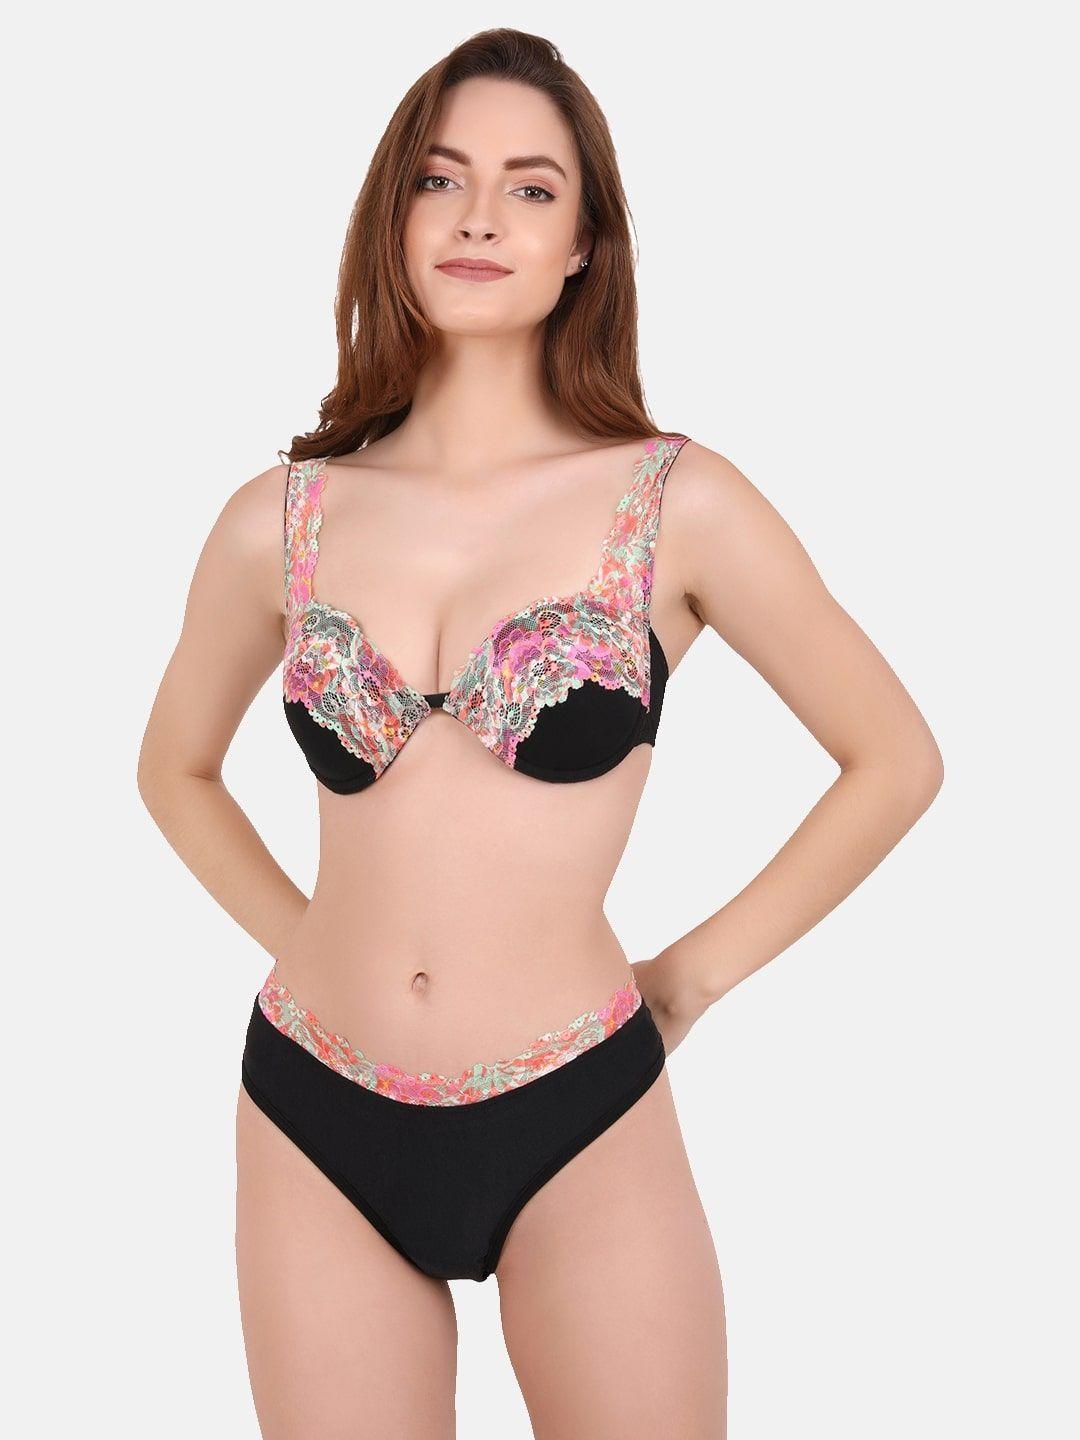 curwish women multicoloured printed push-up bra underwired heavily padded lingerie set